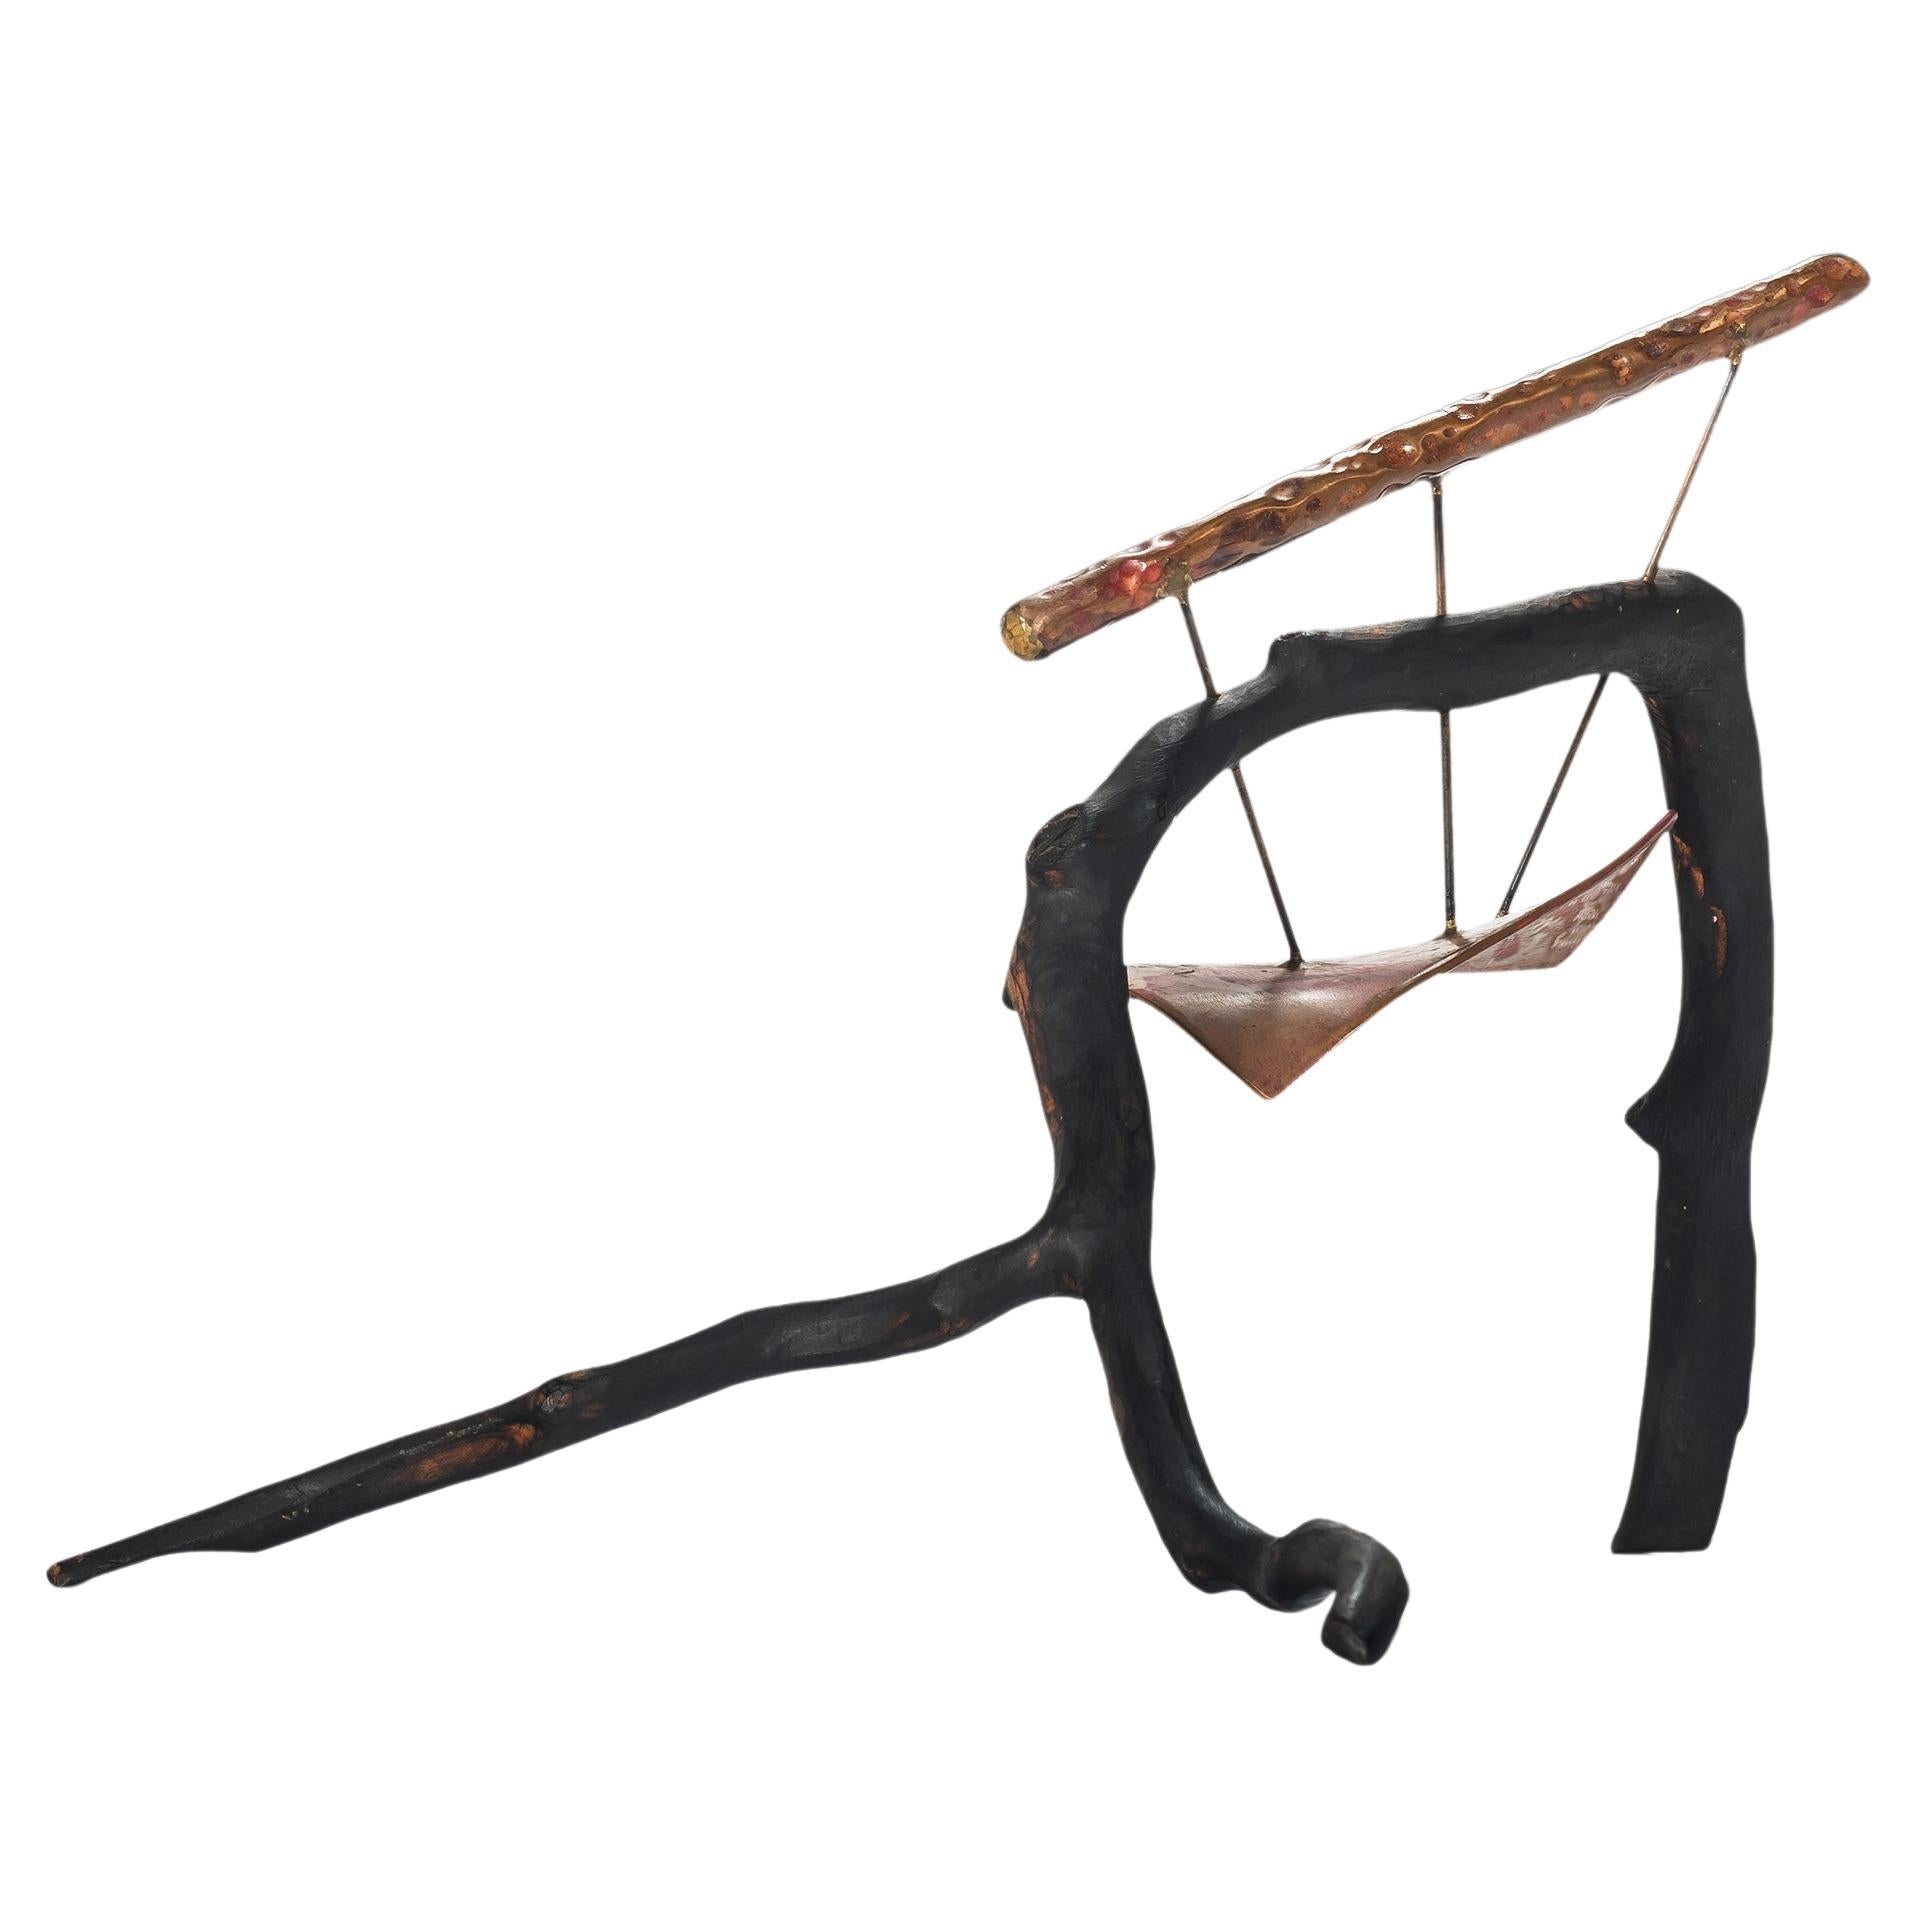 Organic Sculptural Art Composed of Ebonized Wood and Patinaed Copper, c. 1960s For Sale